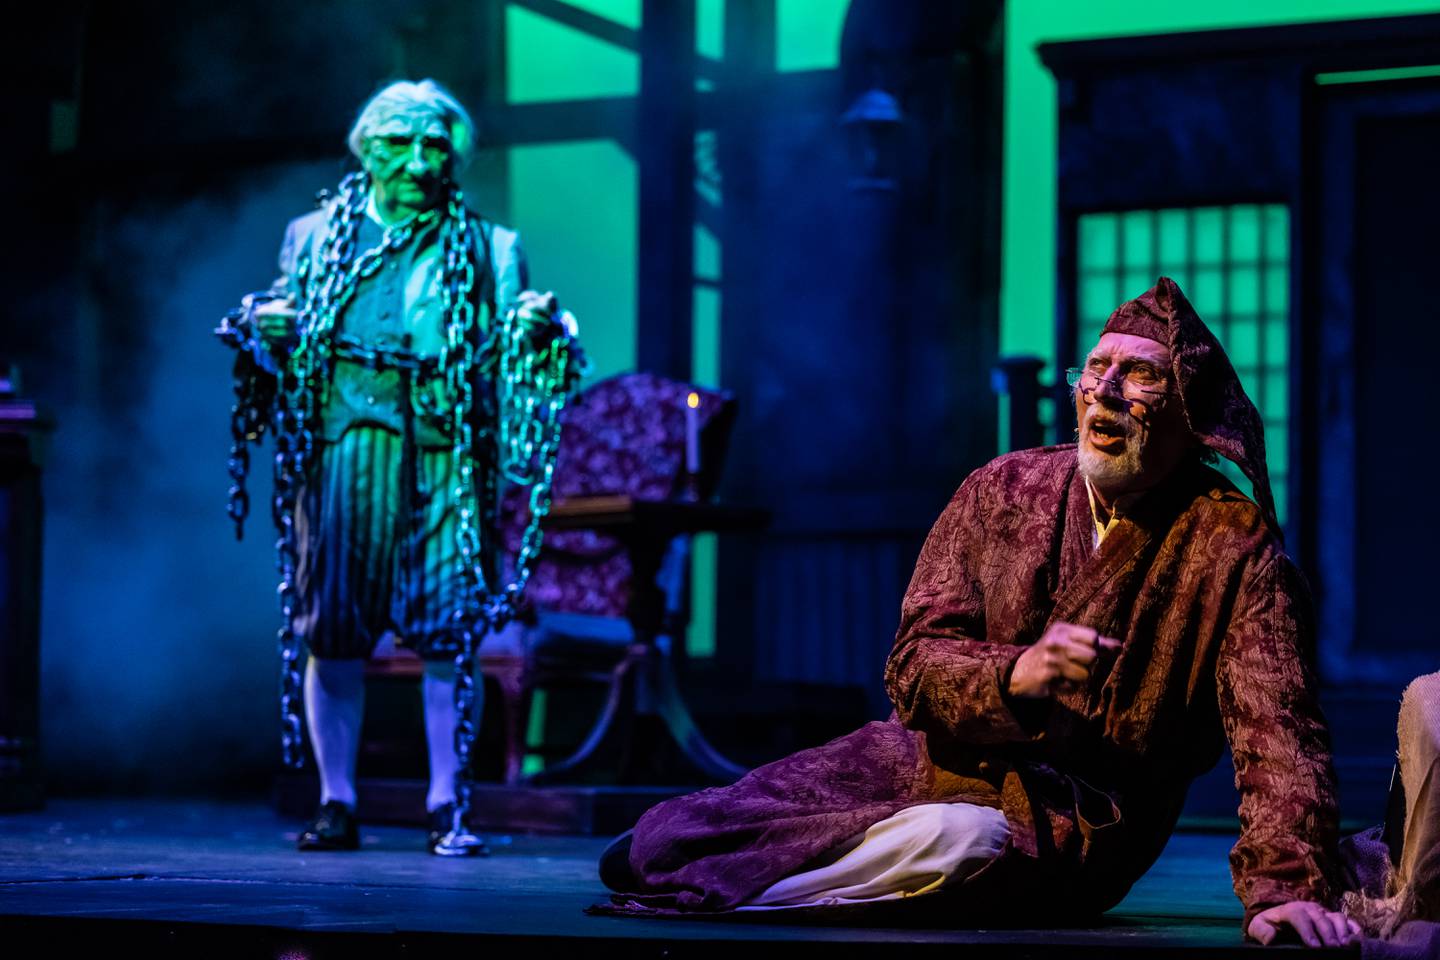 Metropolis production of "A Christmas Carol." Scrooge is played by Steve Connell.